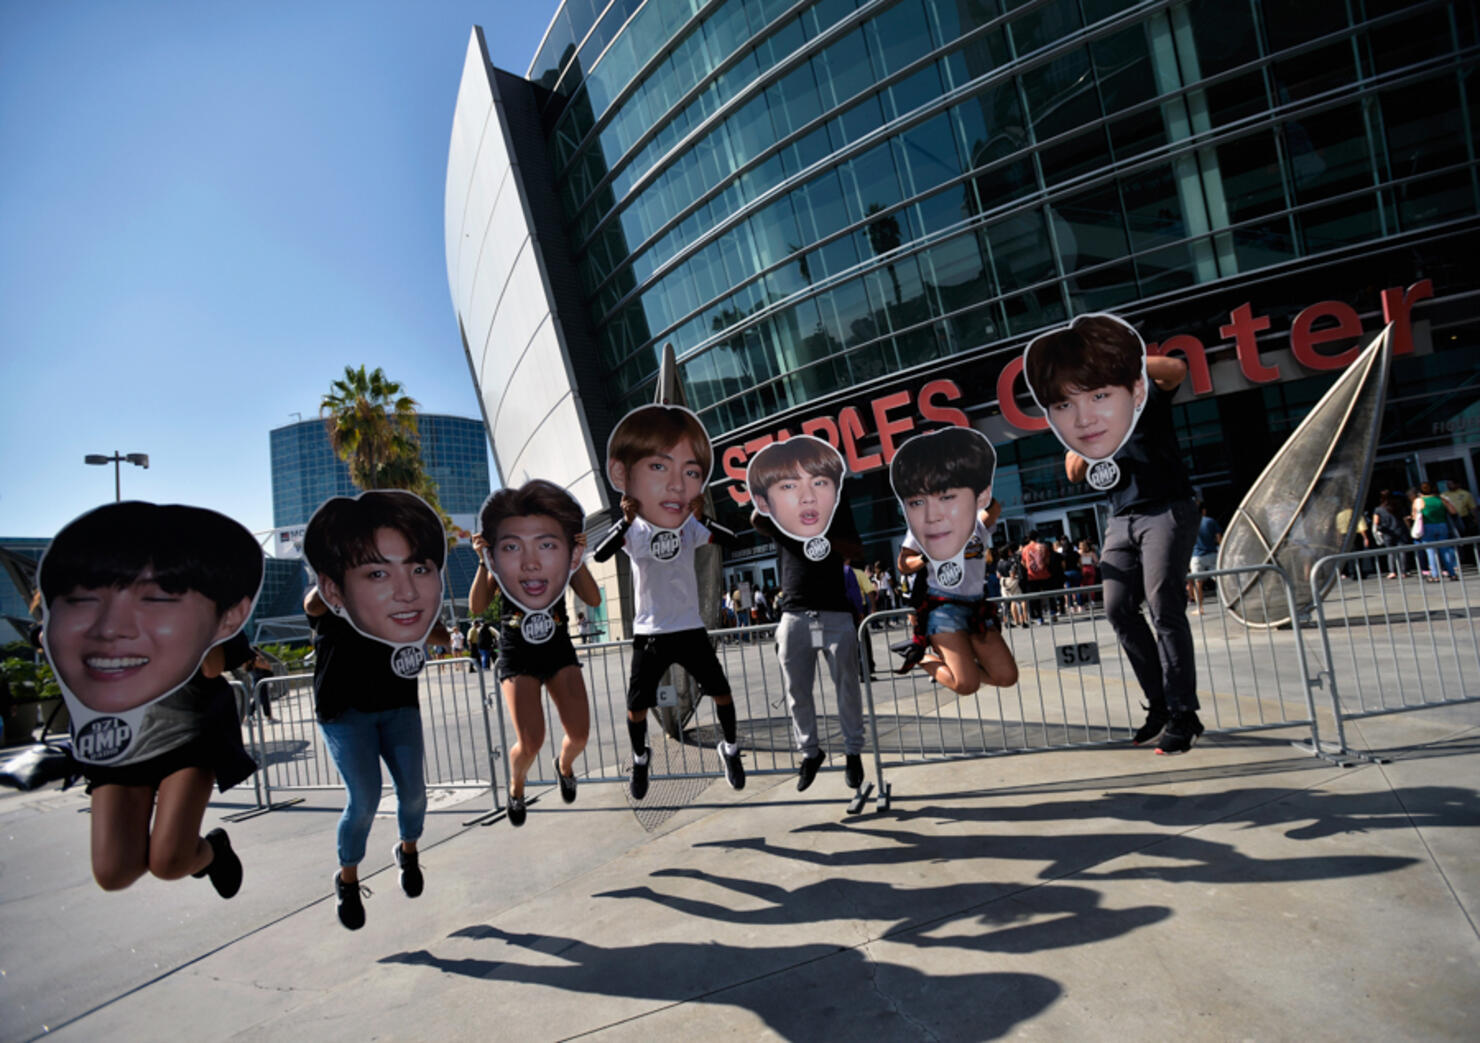 Fans Await The BTS Concert At Staples Center As Part Of The "Love Yourself" North American Tour